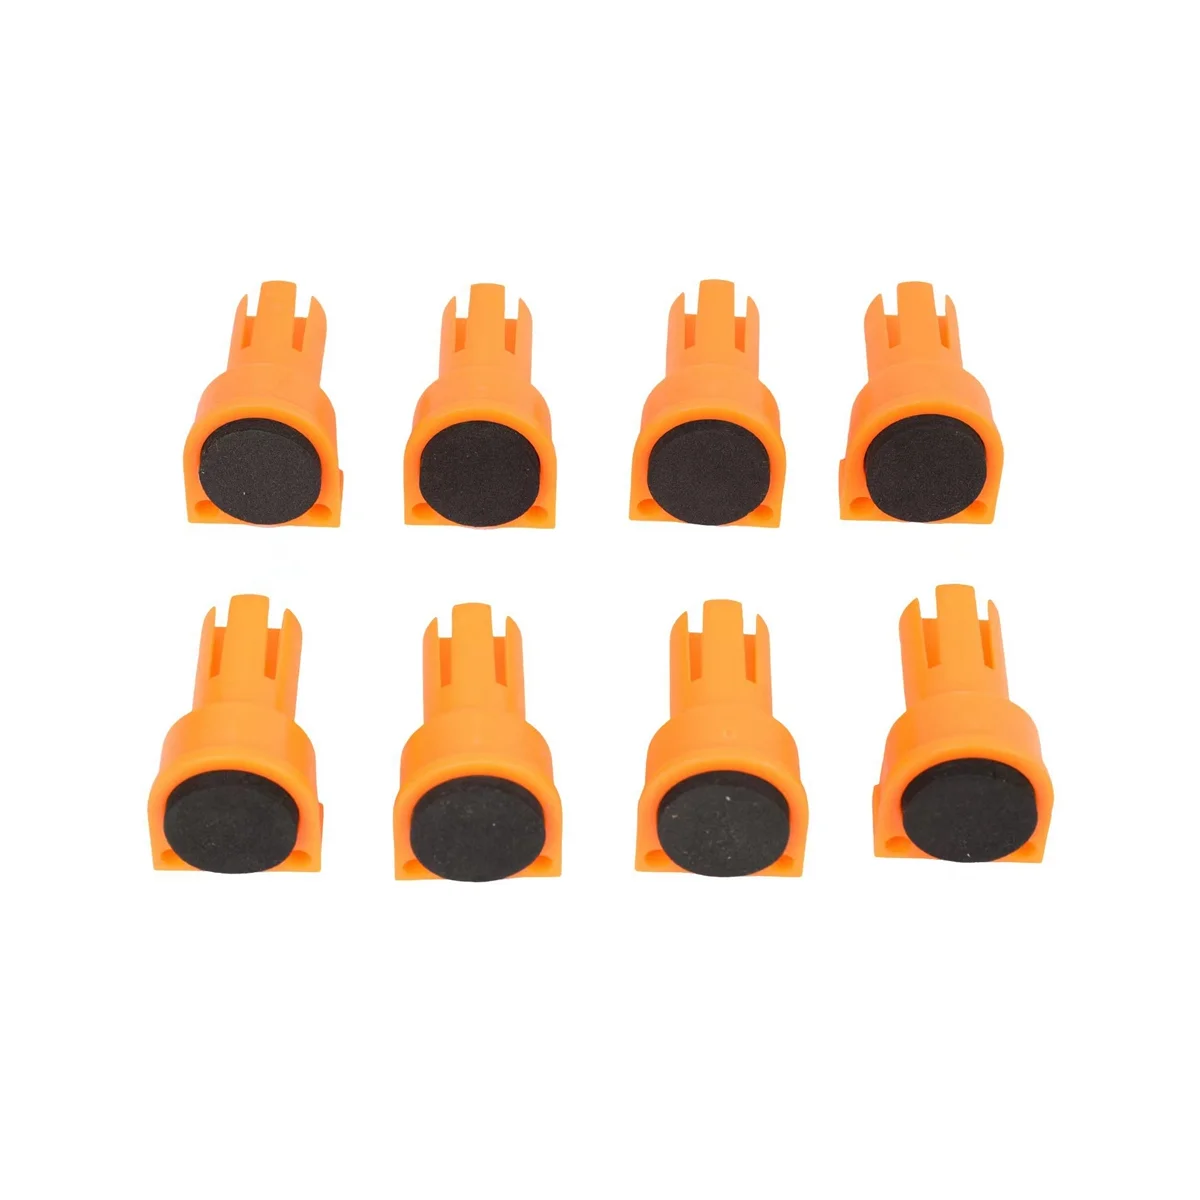 

8Pcs Bench Dog with Grommet Bench Brake Inserts Made of Nonslip EVA for 3/4Inch Dog Holes A Woodworking Shop Essential